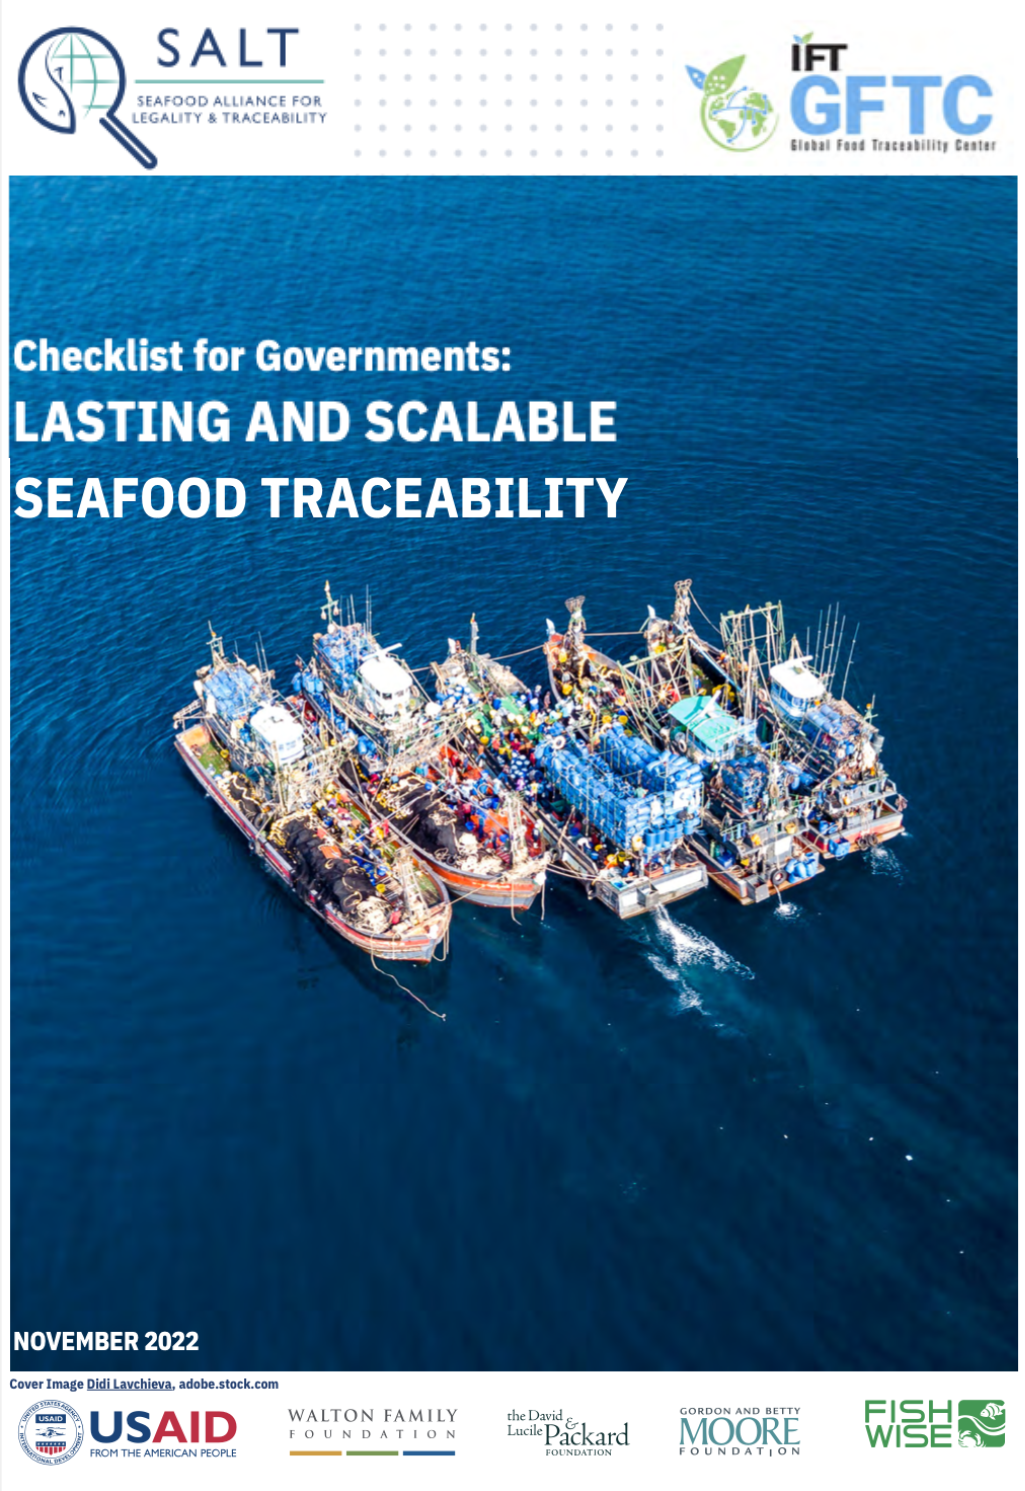 Coverpage with title, SALT and IFT logo, SALT funders, and visual of industrial boats rafted up together at sea